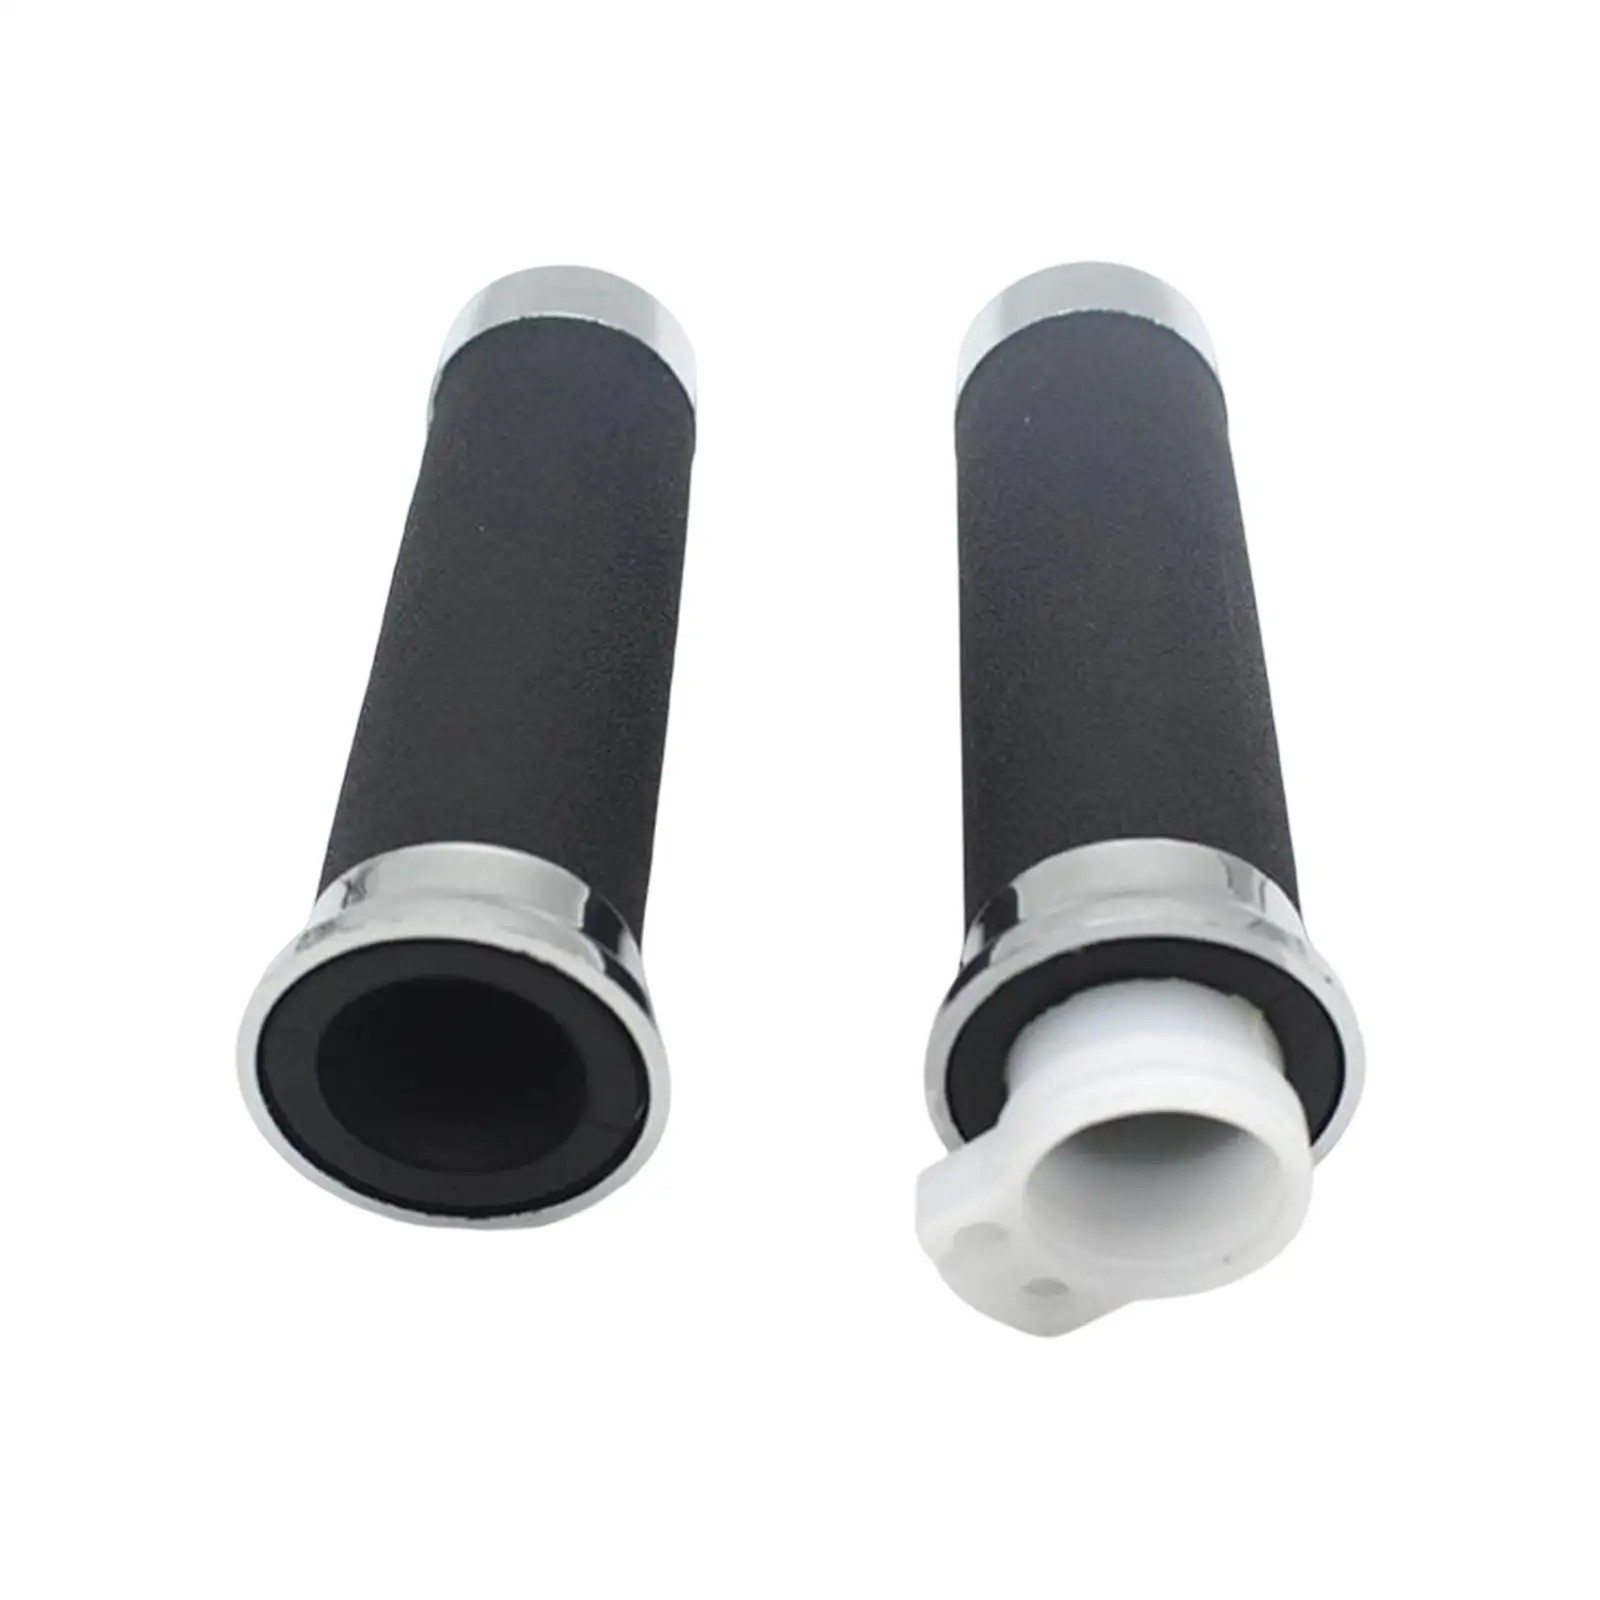 2 Pieces Motorcycle Handlebar Grips for Honda Magna 250 Accessories